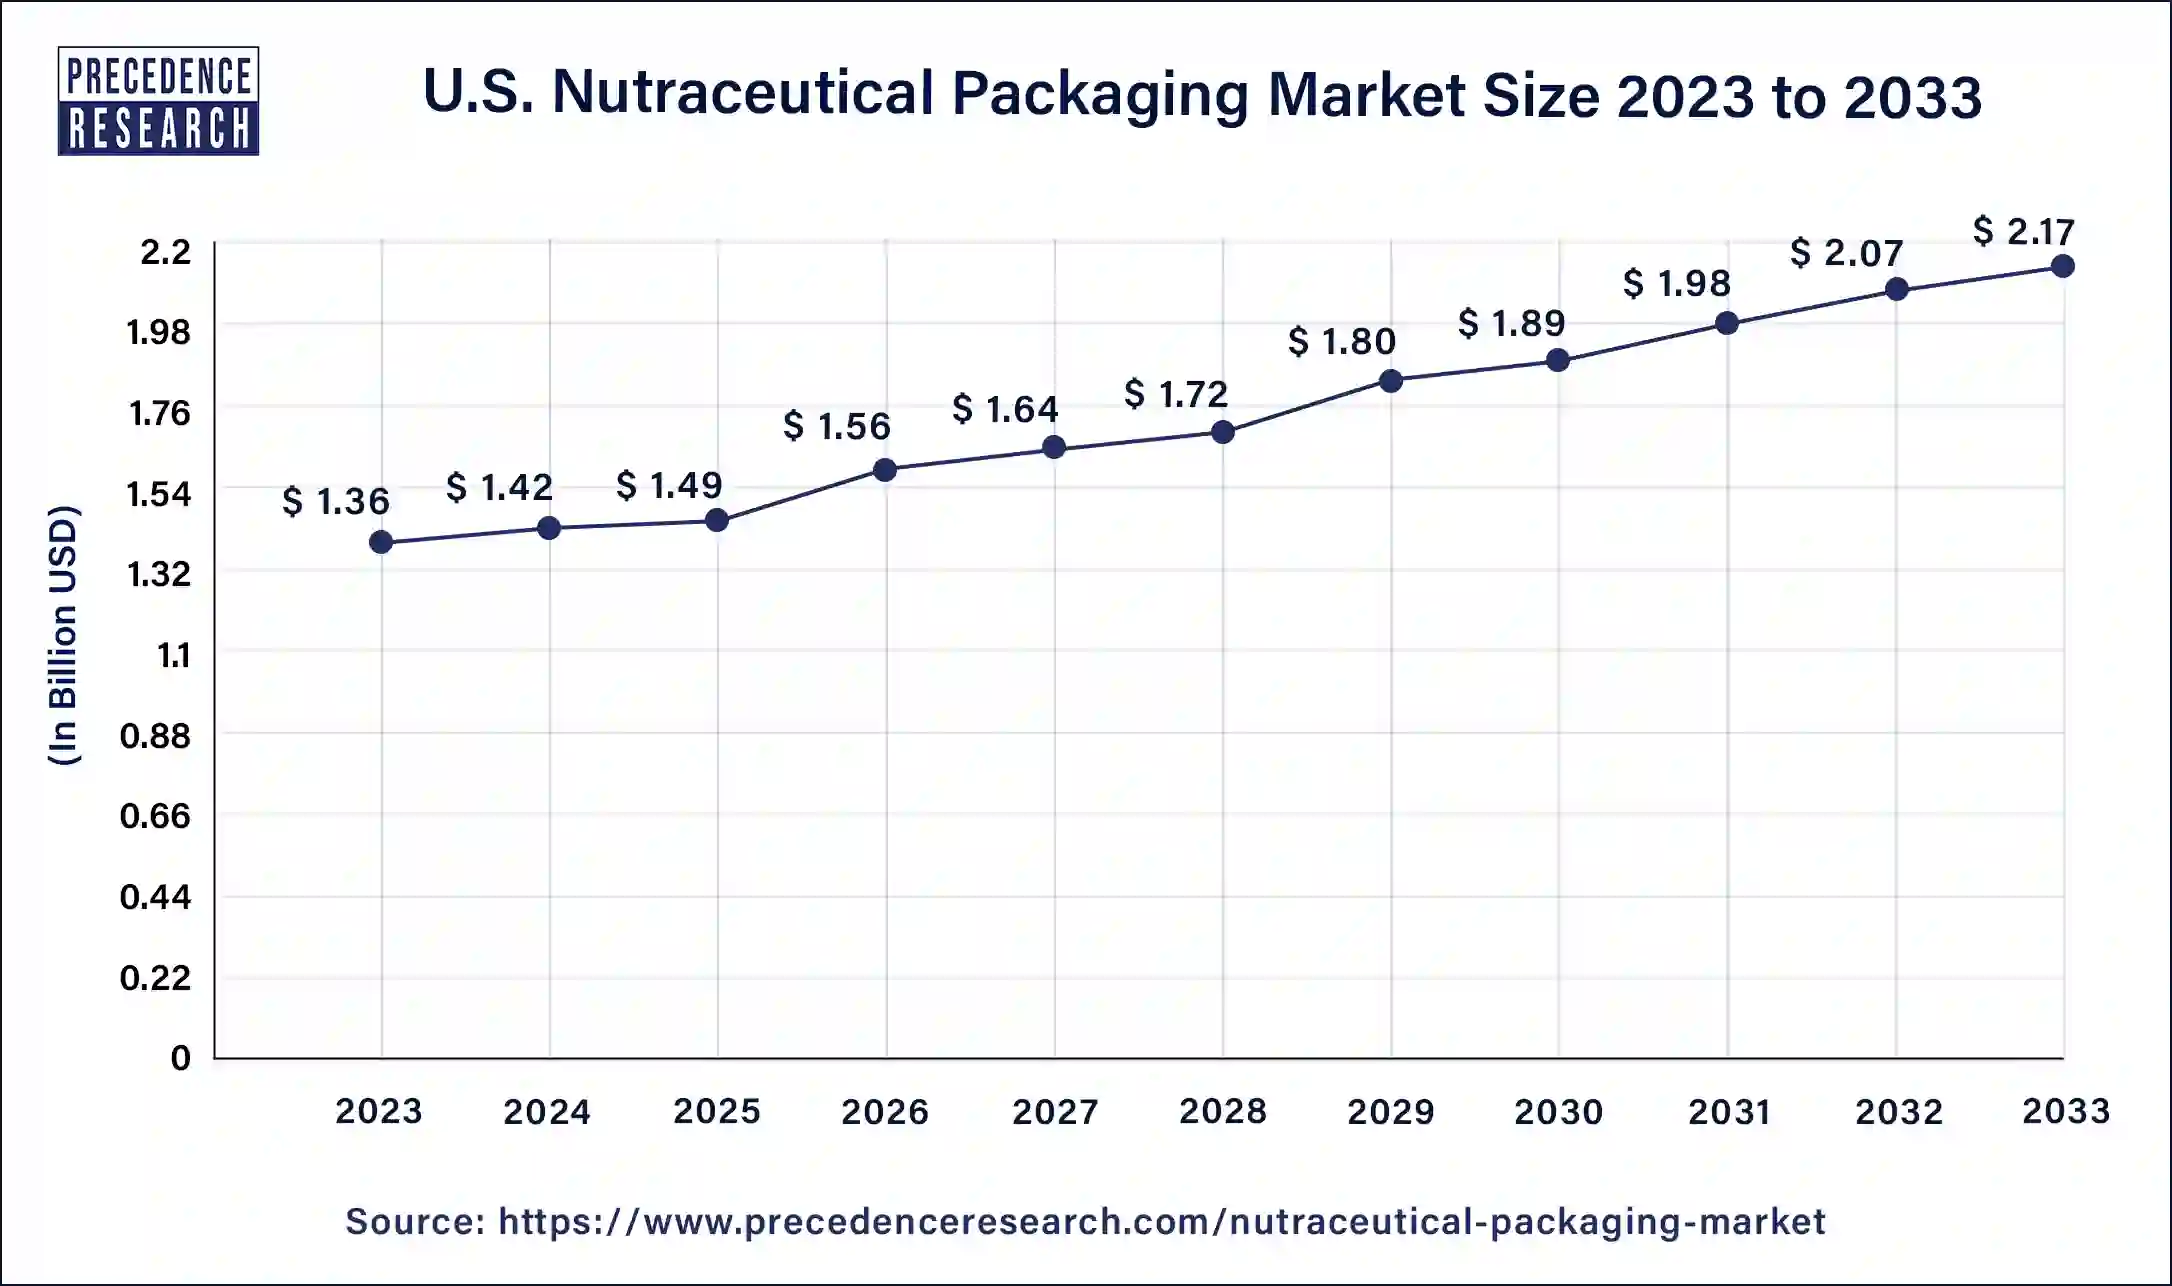 U.S. Nutraceutical Packaging Market Size 2024 to 2033